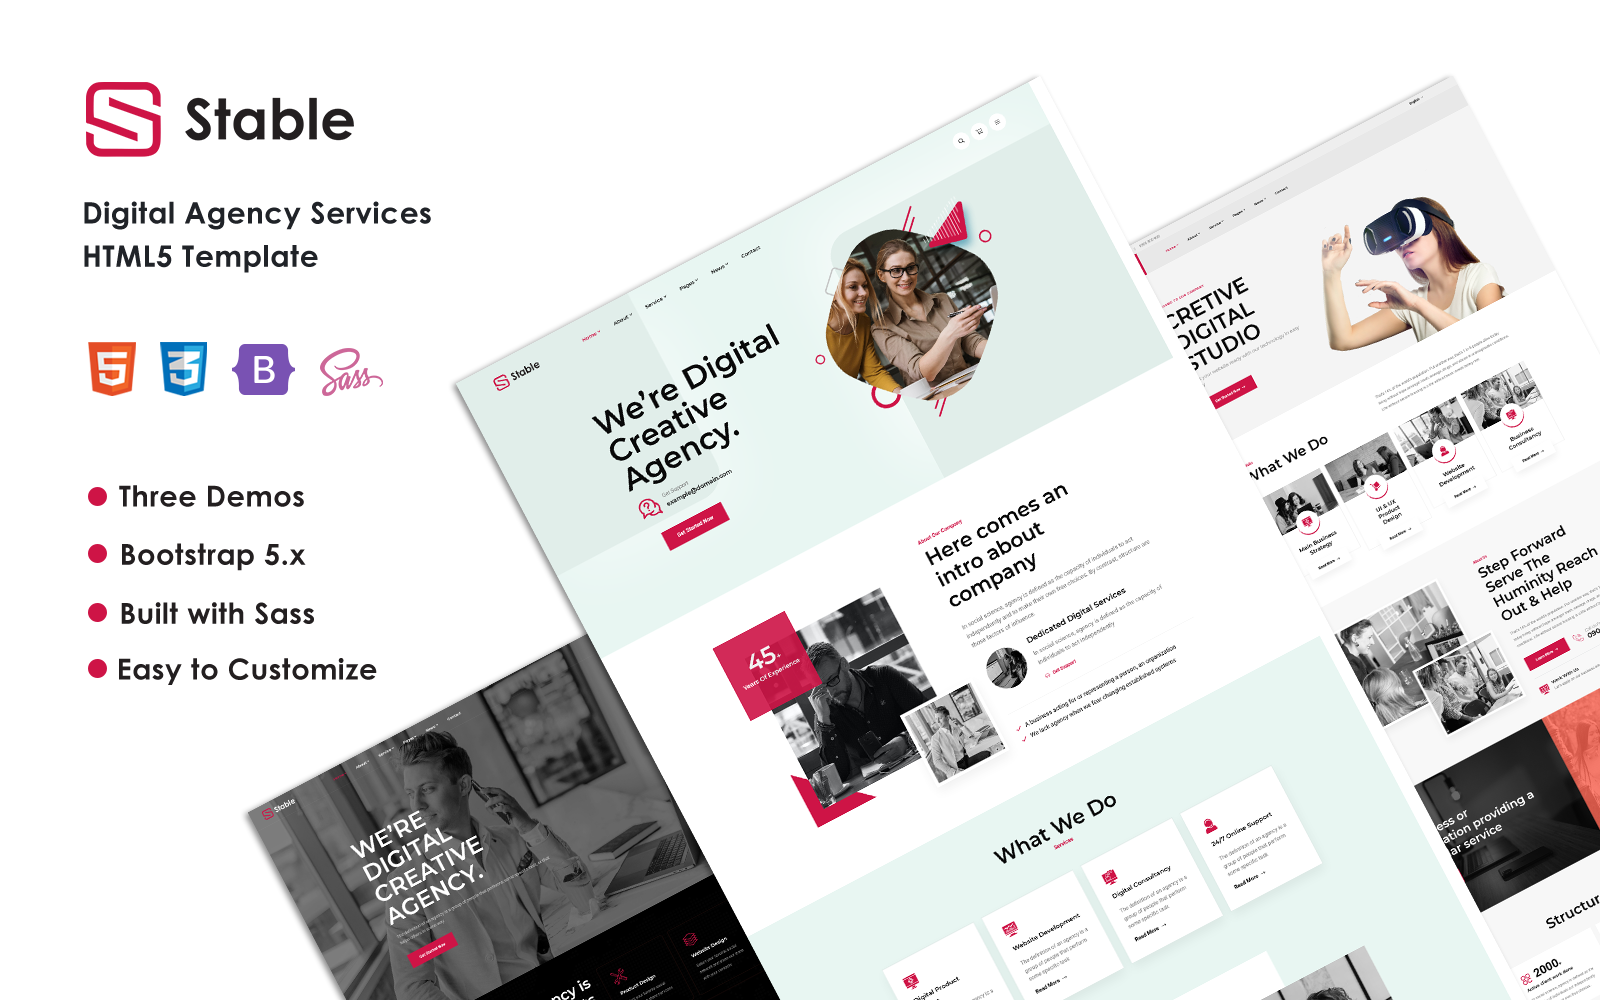 Stable - Digital Agency Services Bootstrap 5 Template